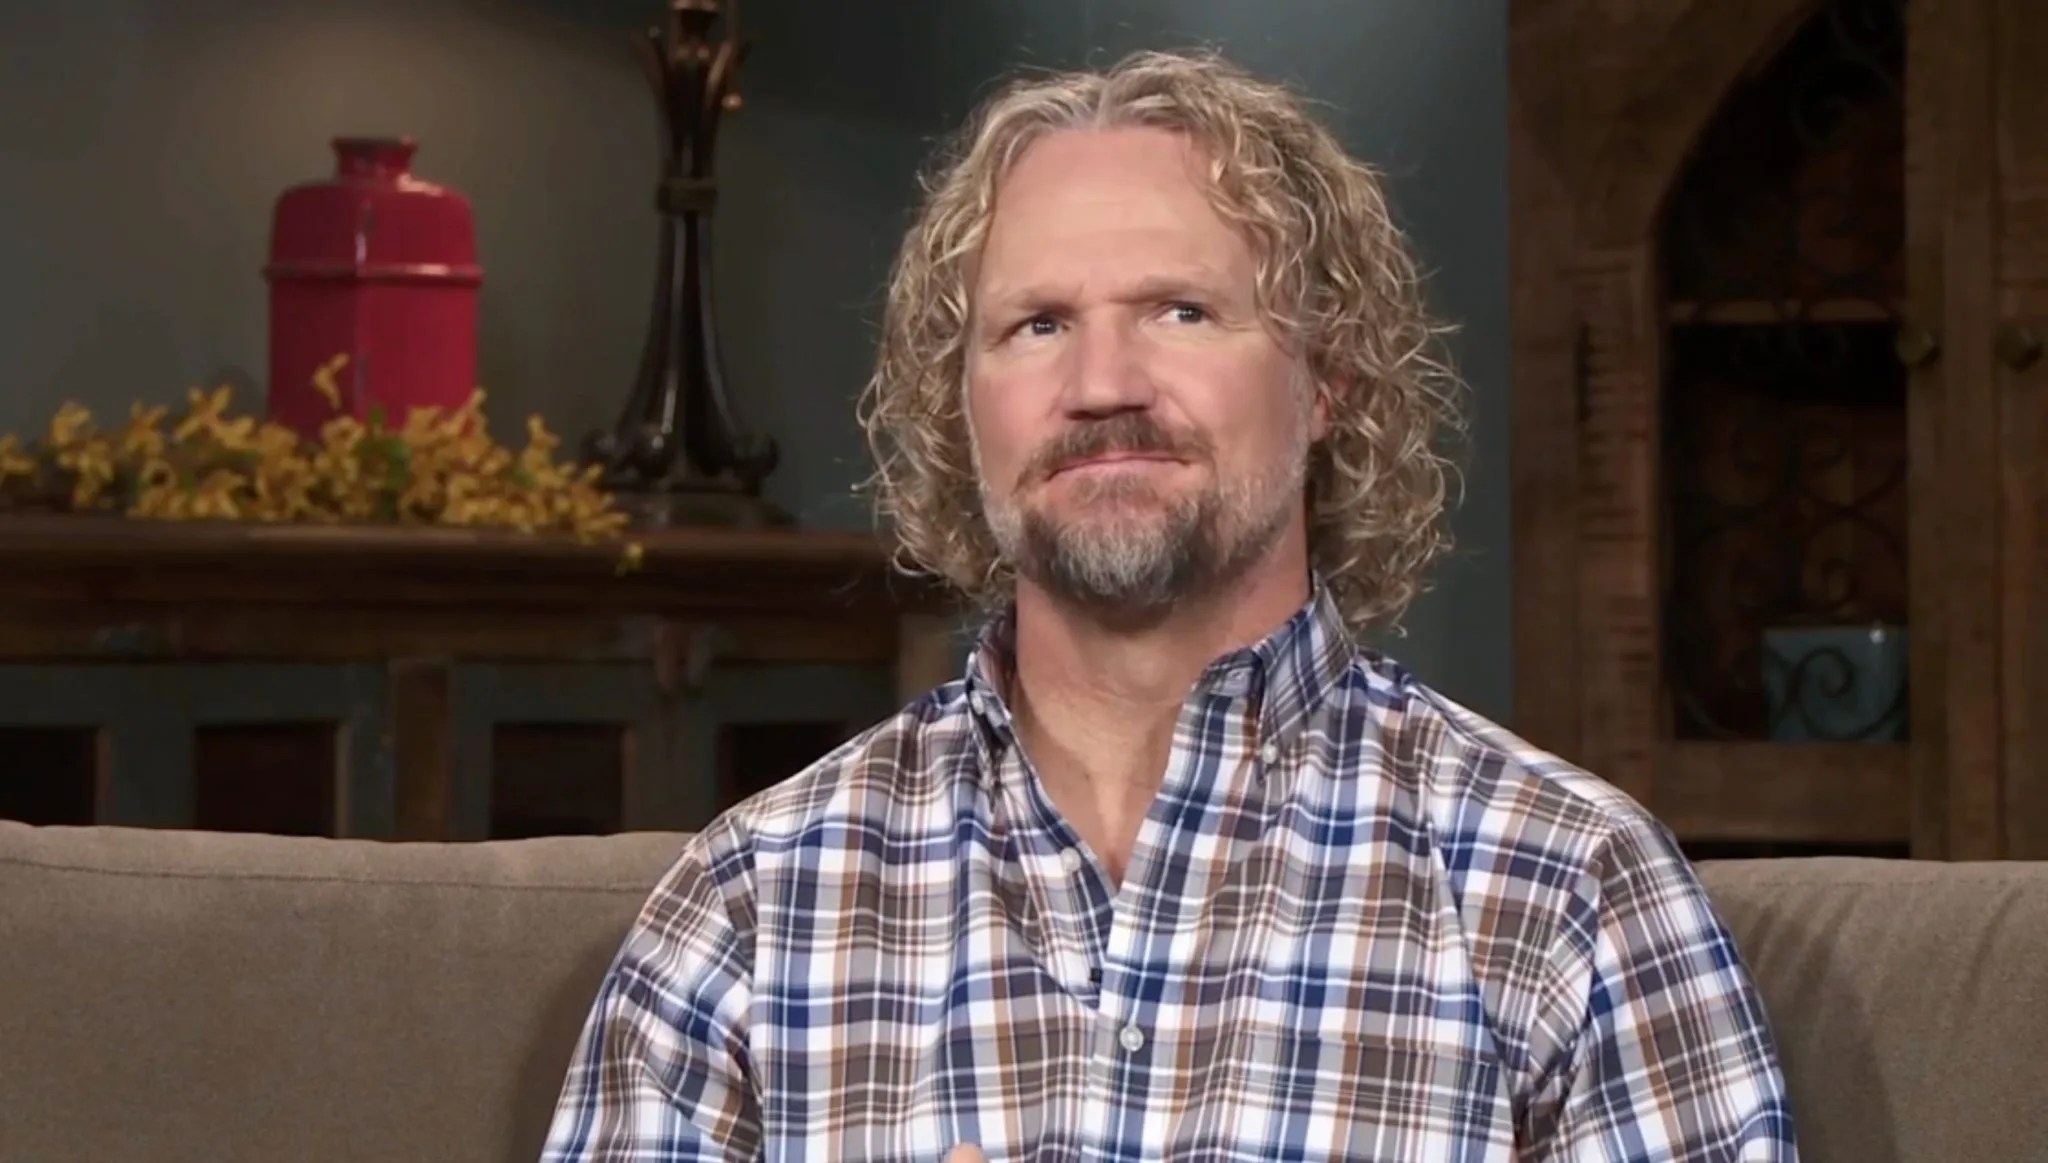 'Sister Wives' star, Kody Brown, in an interview on TLC.